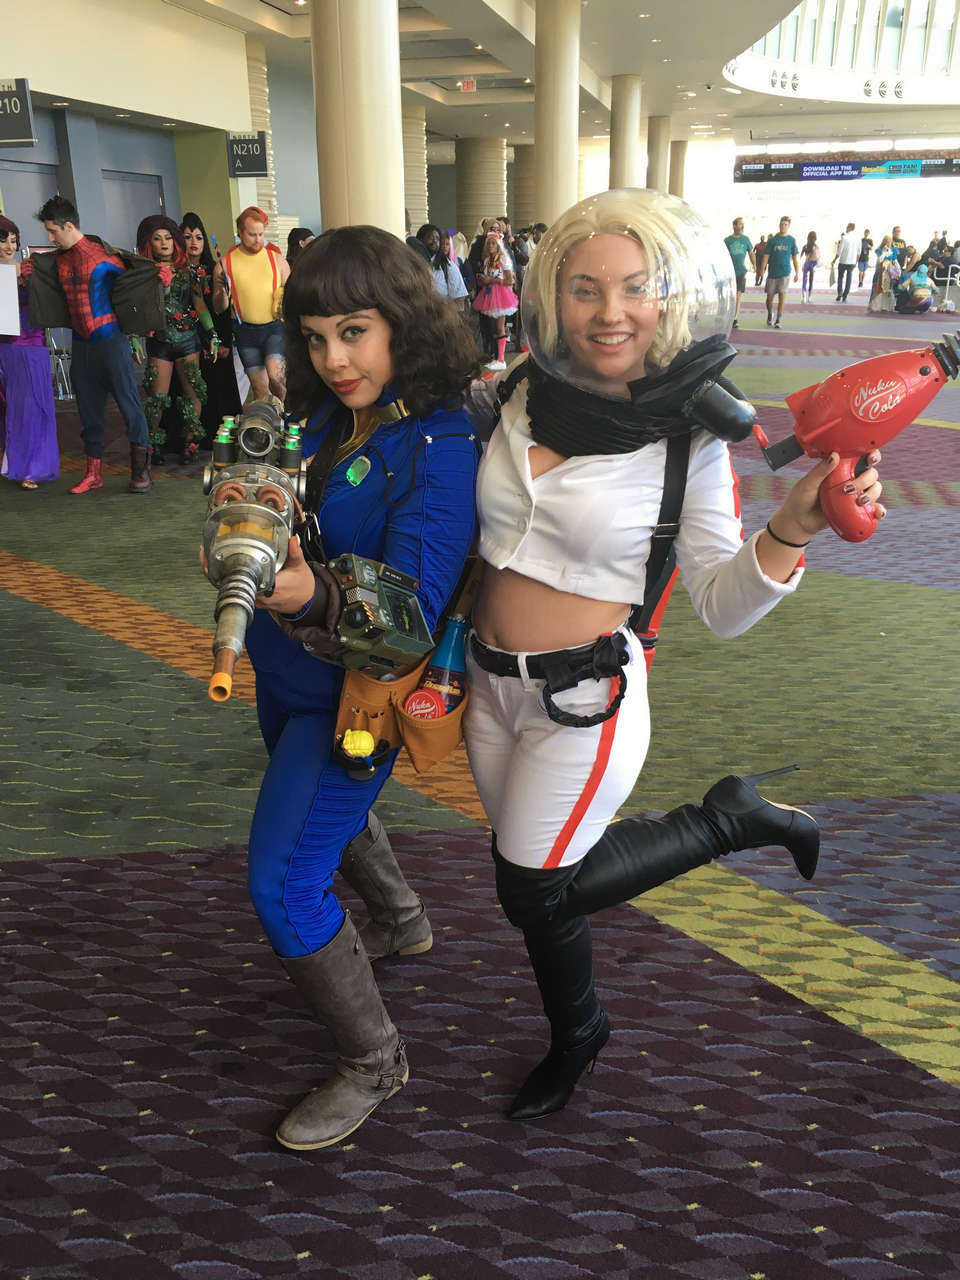 My Wife The Vault Dweller And The Nuka Cola Girl At Megacon Orland